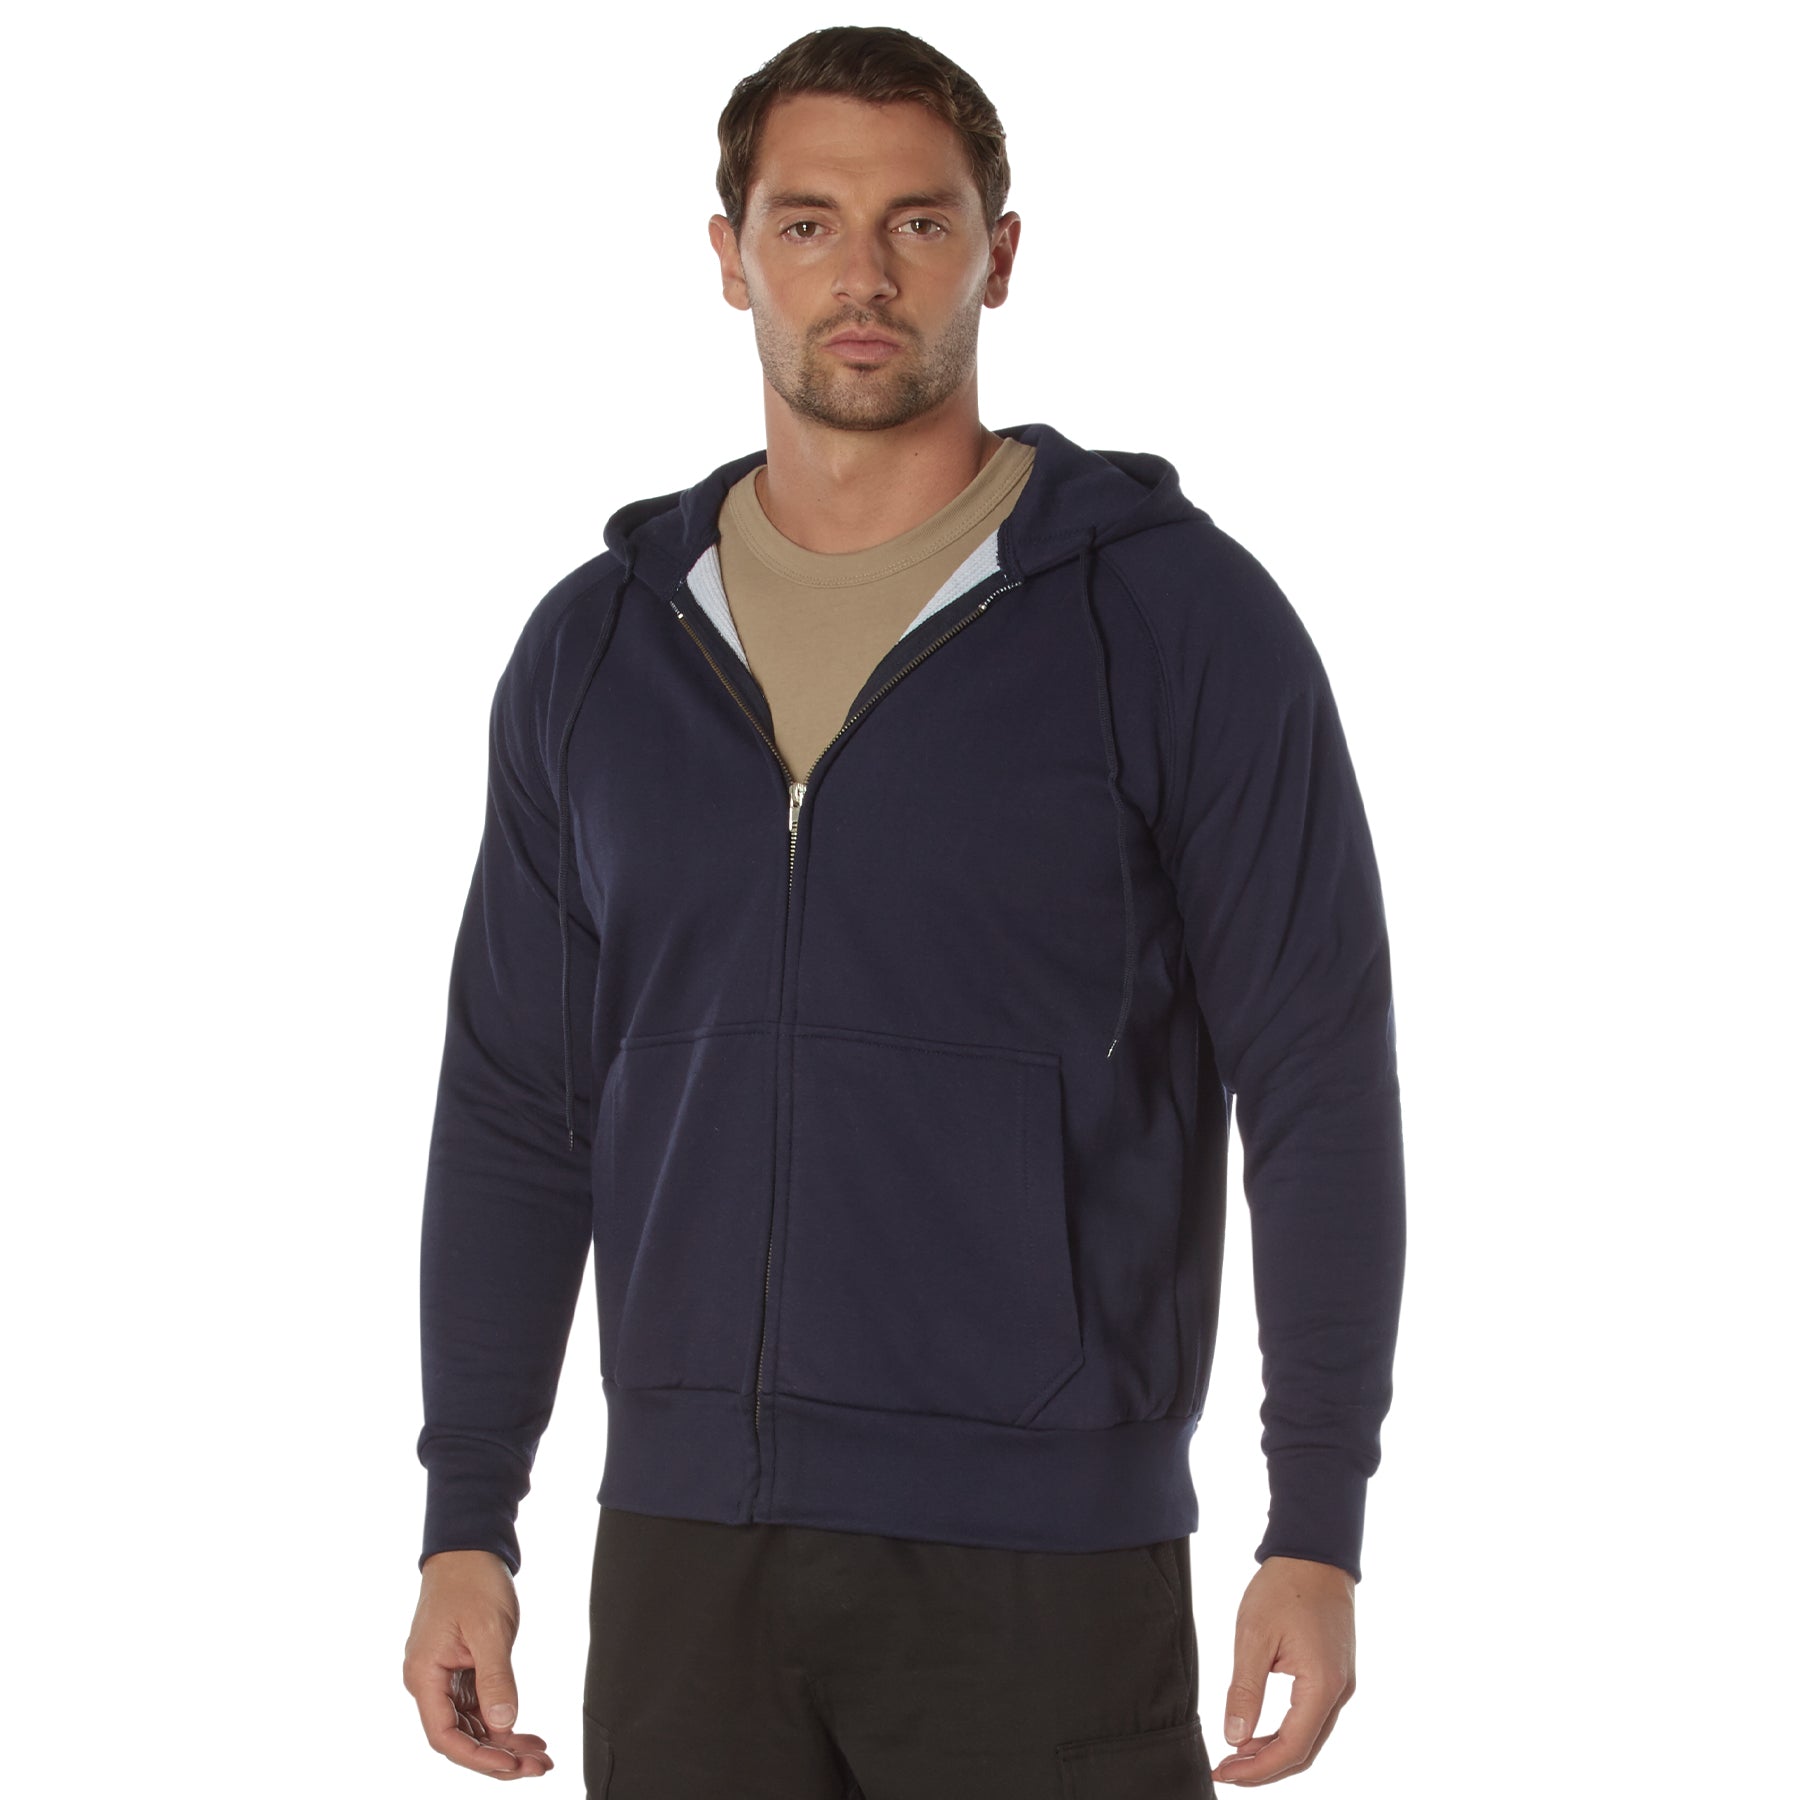 Poly/Cotton Thermal-Lined Zipper Hooded Sweatshirts Navy Blue